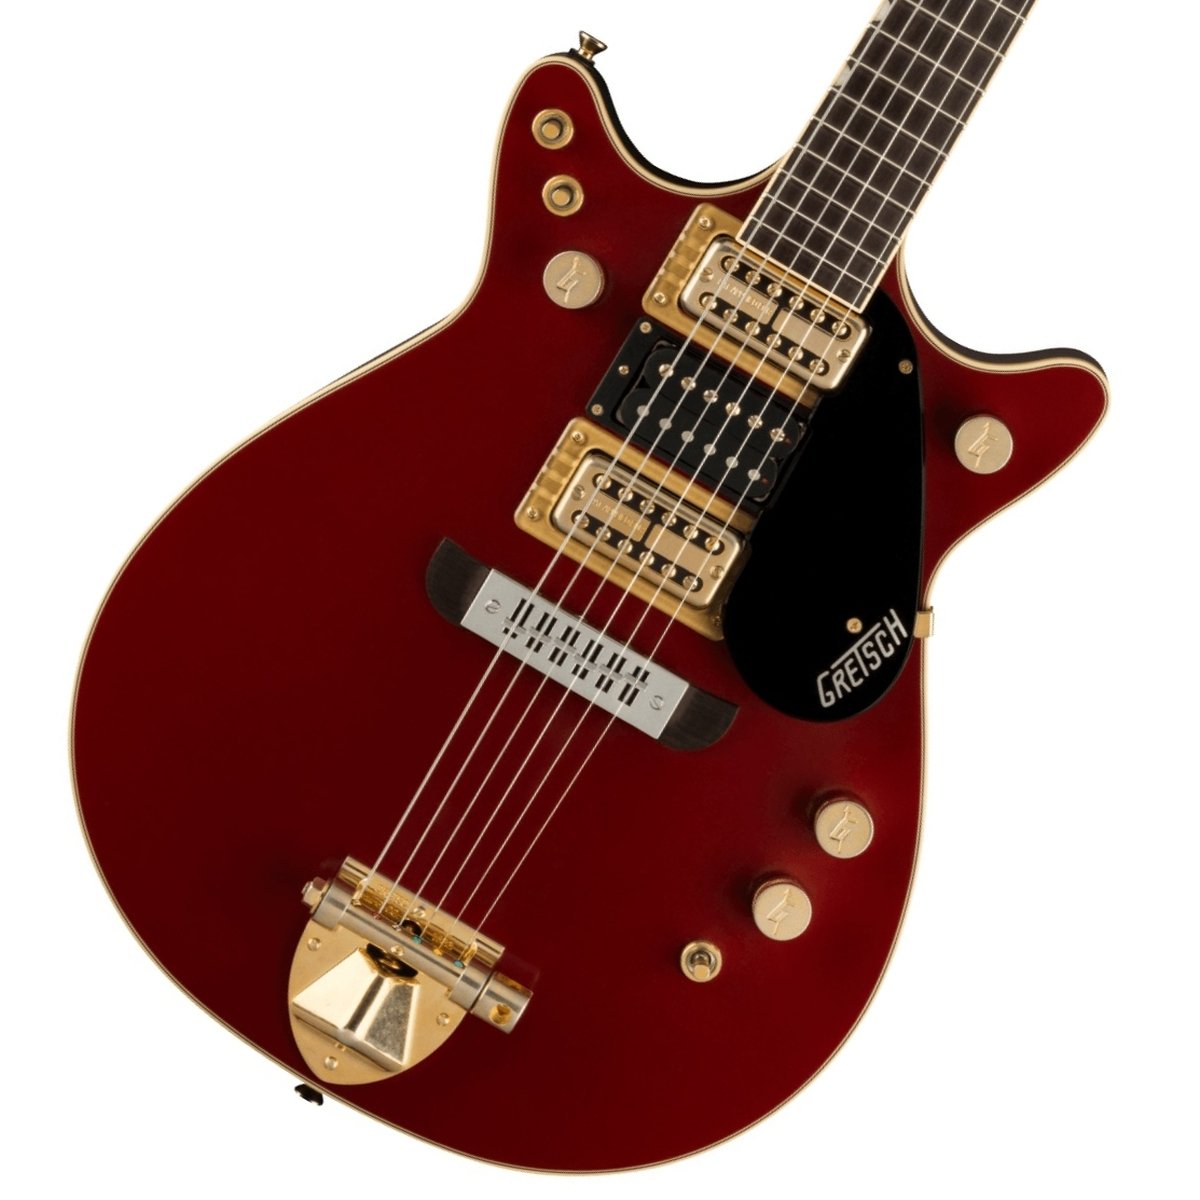 Gretsch   G6131-MY-RB Limited Edition Malcolm Young Signature Jet Ebony Fingerboard Vintage Firebird Red グレッチ  最大58%OFFクーポン